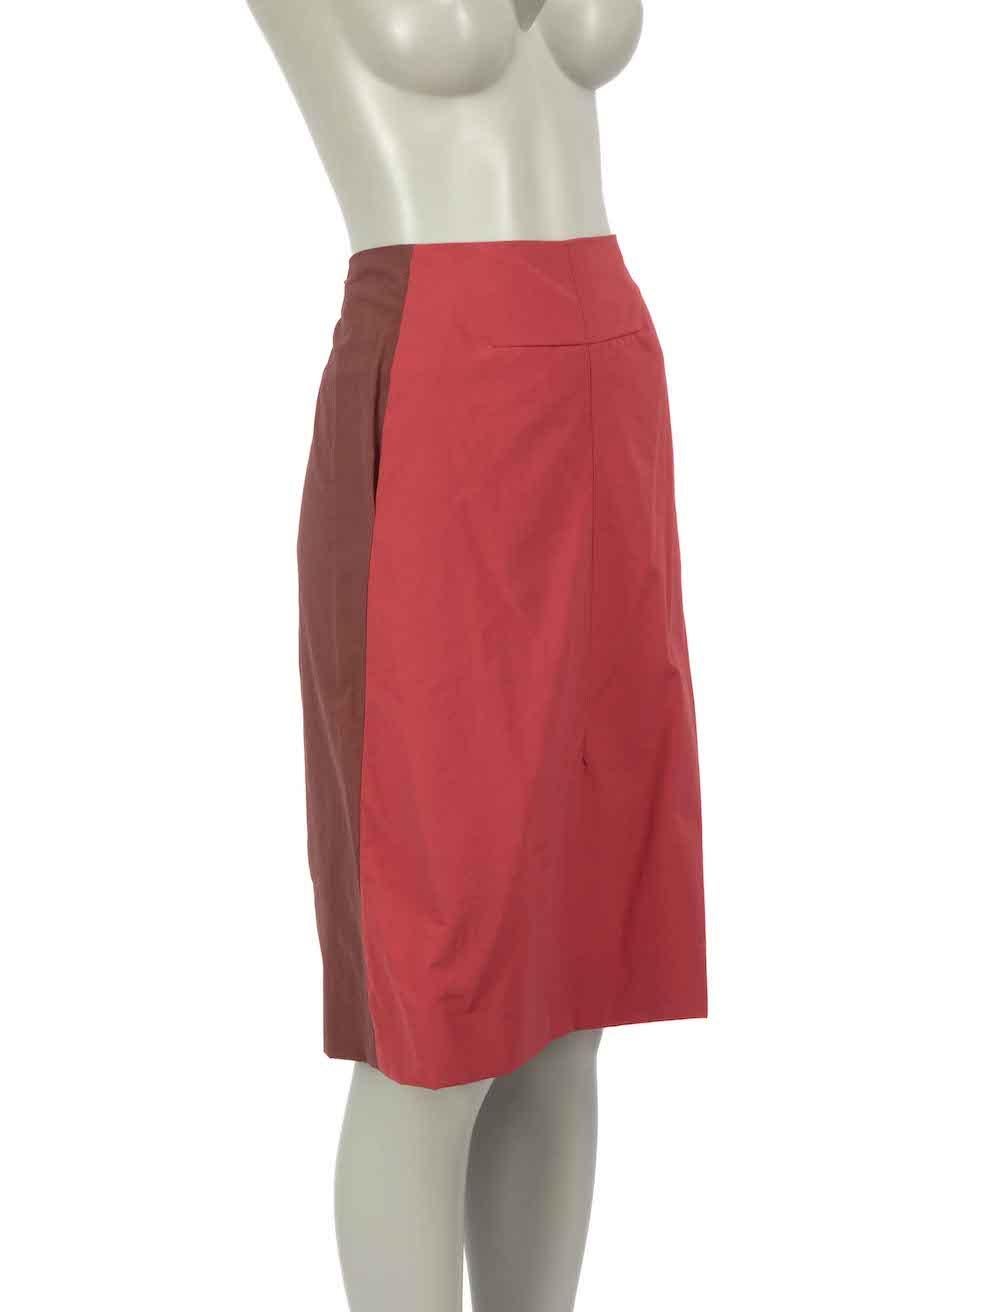 CONDITION is Very good. Hardly any visible wear to skirt is evident on this used Marni designer resale item.

Details
Burgundy
Cotton
Pencil skirt
Knee length
Contrast panel
2x Front side pockets
Made in Italy

Composition
50% Cotton and 50%